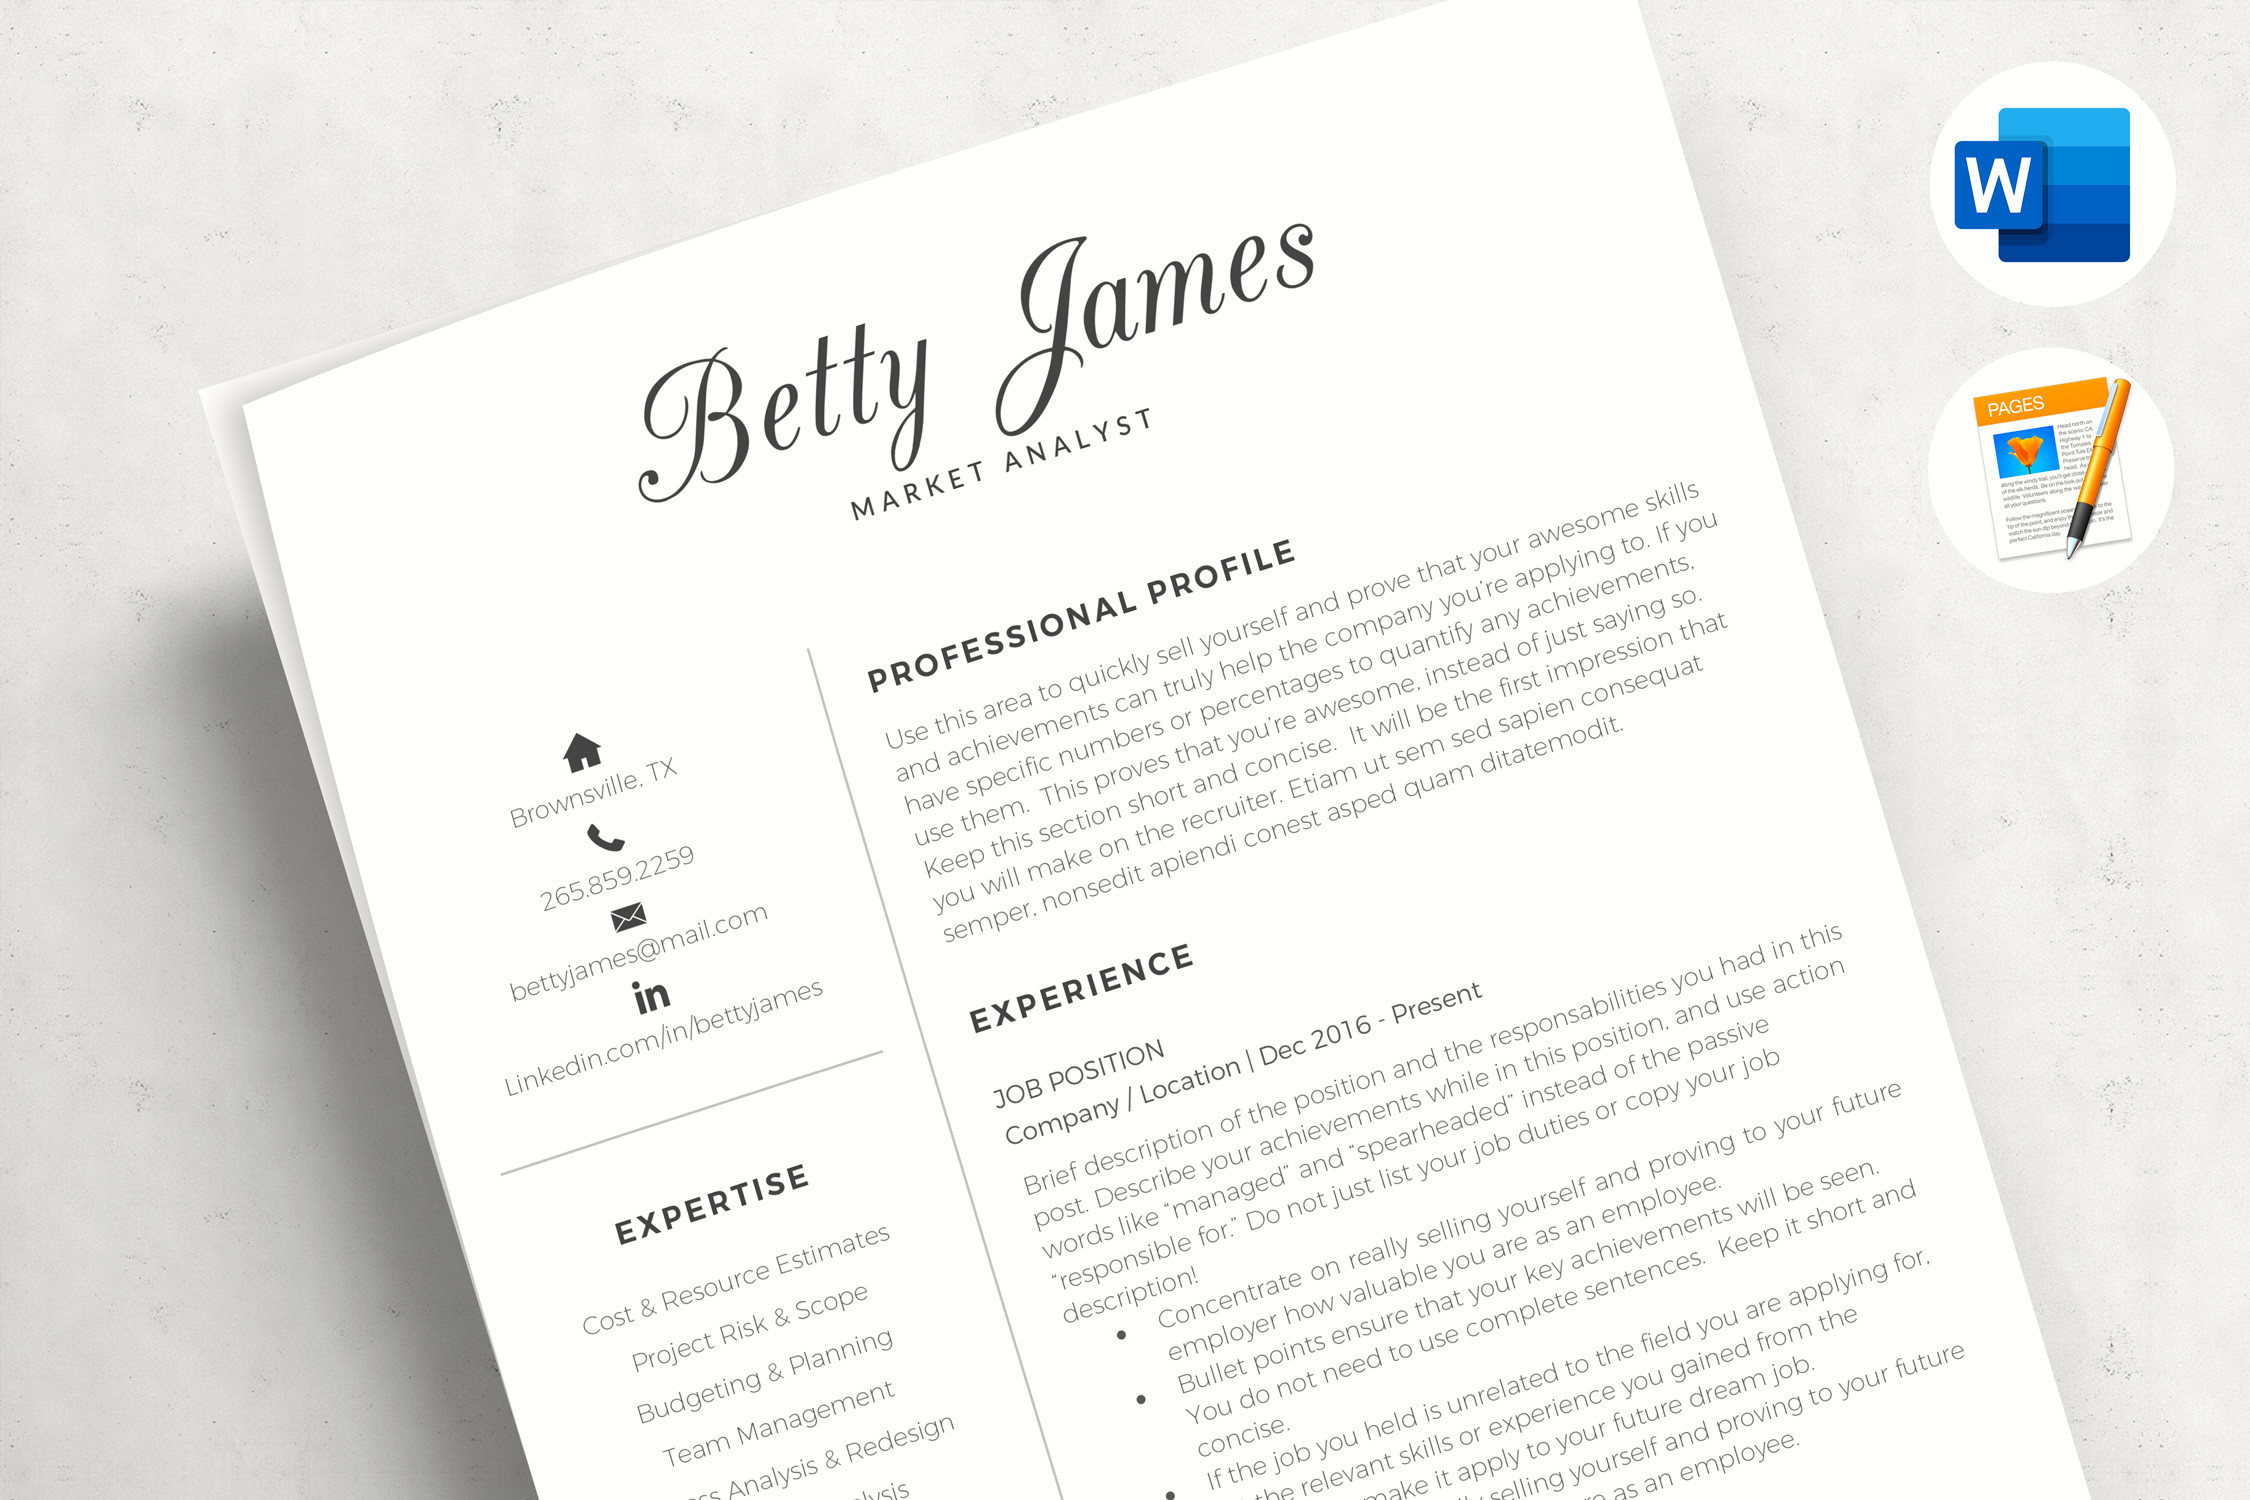 Sample Resume for Career Change From Hairstylist to Clerical Minimalist Resume, Cover Letter & References